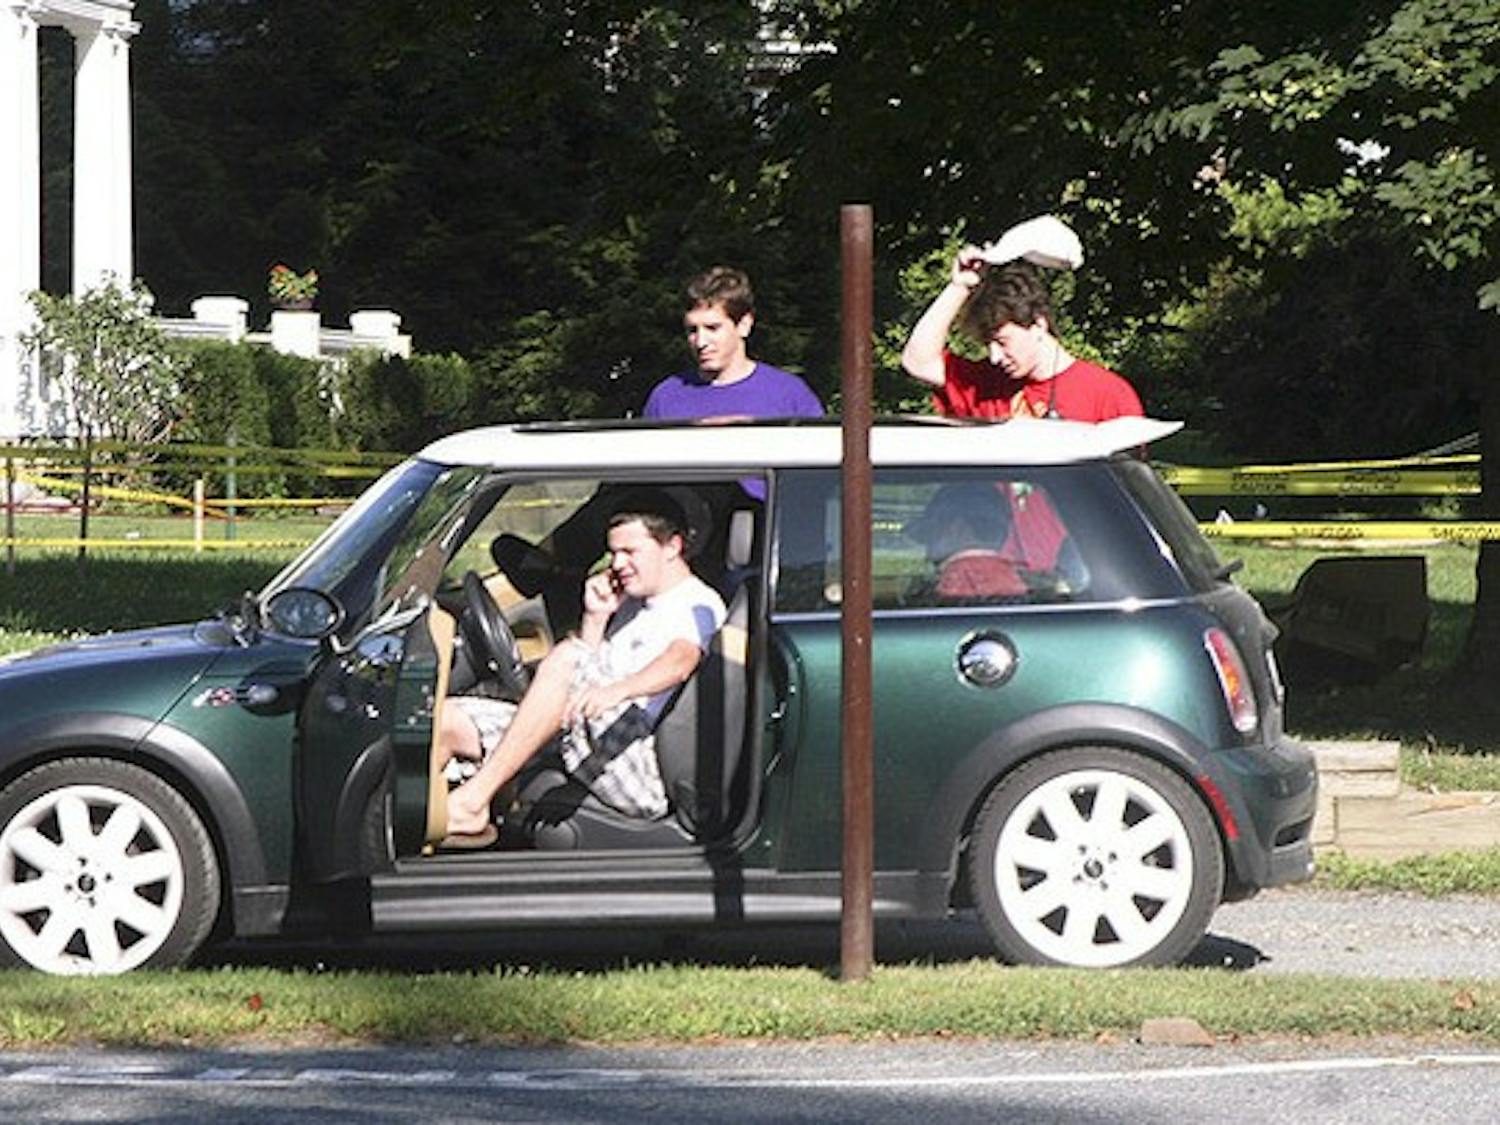 EVERYONE SQUEEZE IN: Five sophomores attempt to pile into a Mini Cooper on Webster Avenue.